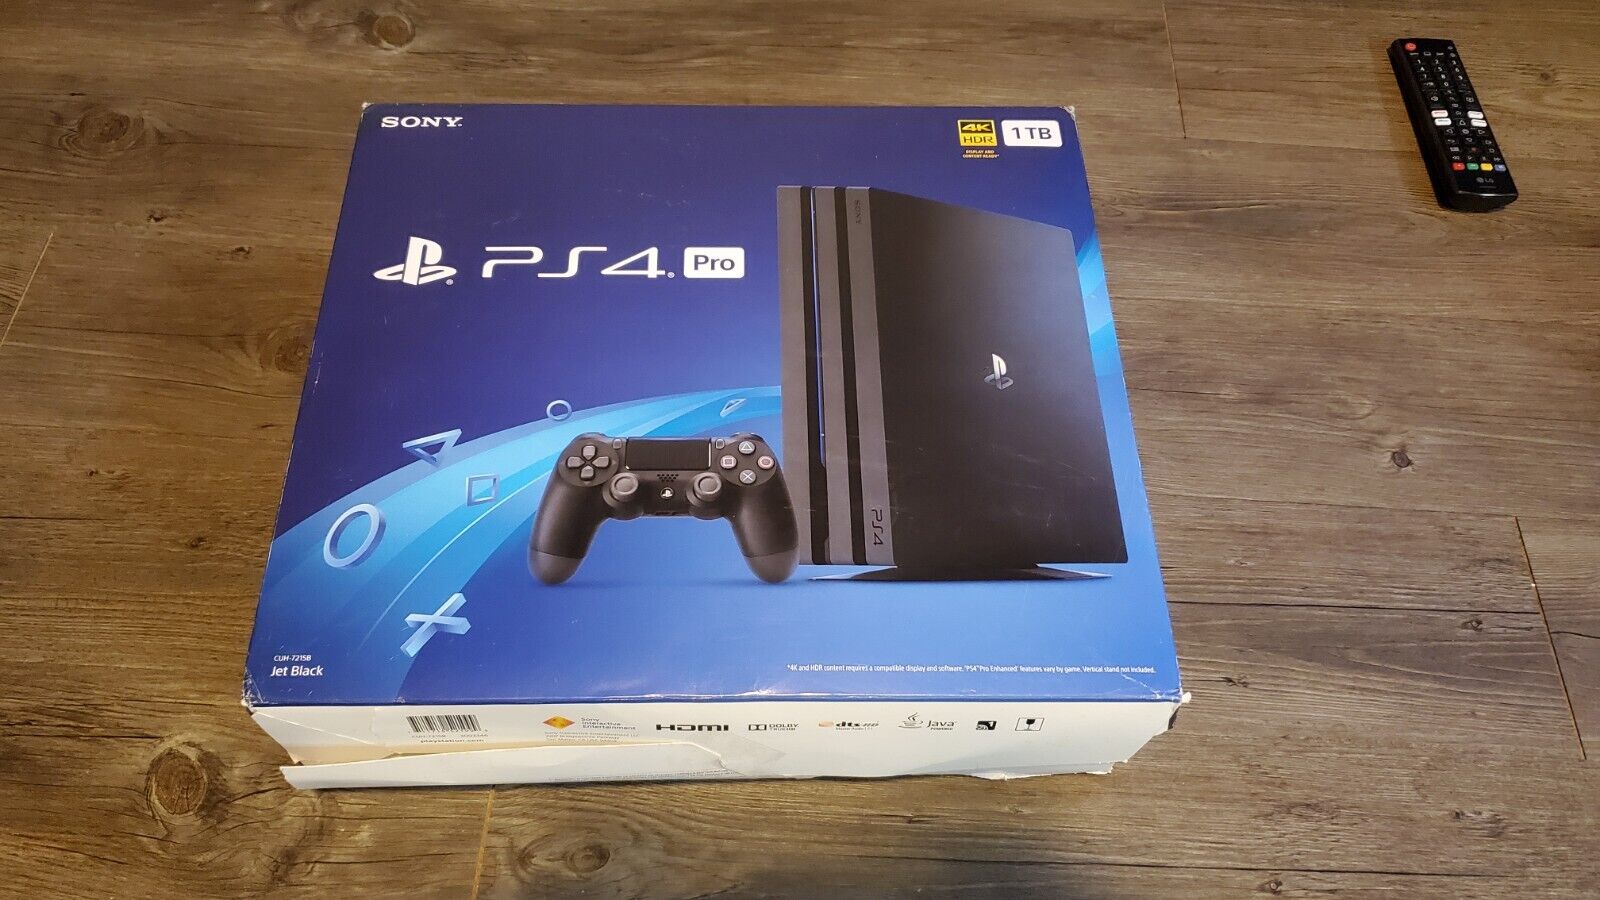 Trojan horse fur Supposed to Sony PlayStation 4 Pro 1TB Console - Jet Black (CUH-7215B) for sale online  | eBay